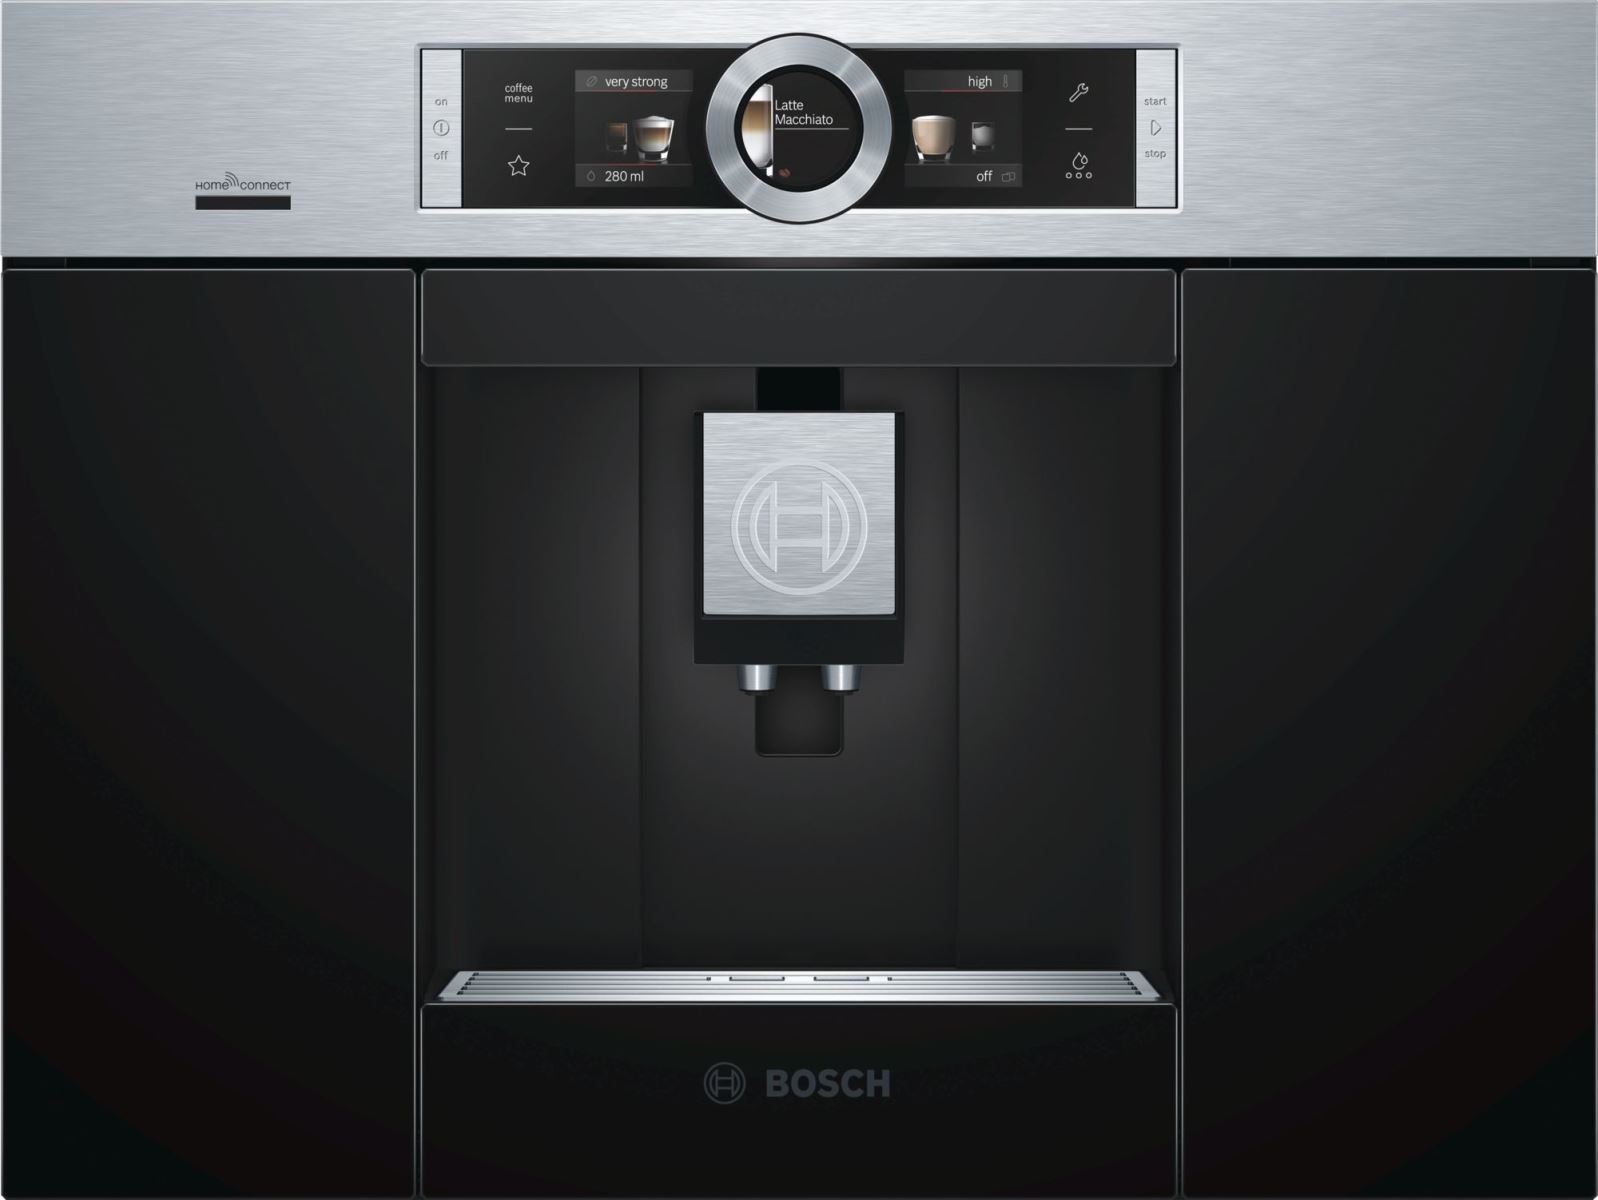 Espressor incorporabil Bosch CTL636ES6, 19 bar, 1600 W, 2.4 l, Display TFT, Touch control, Spumare lapte, Home Connect, Inox